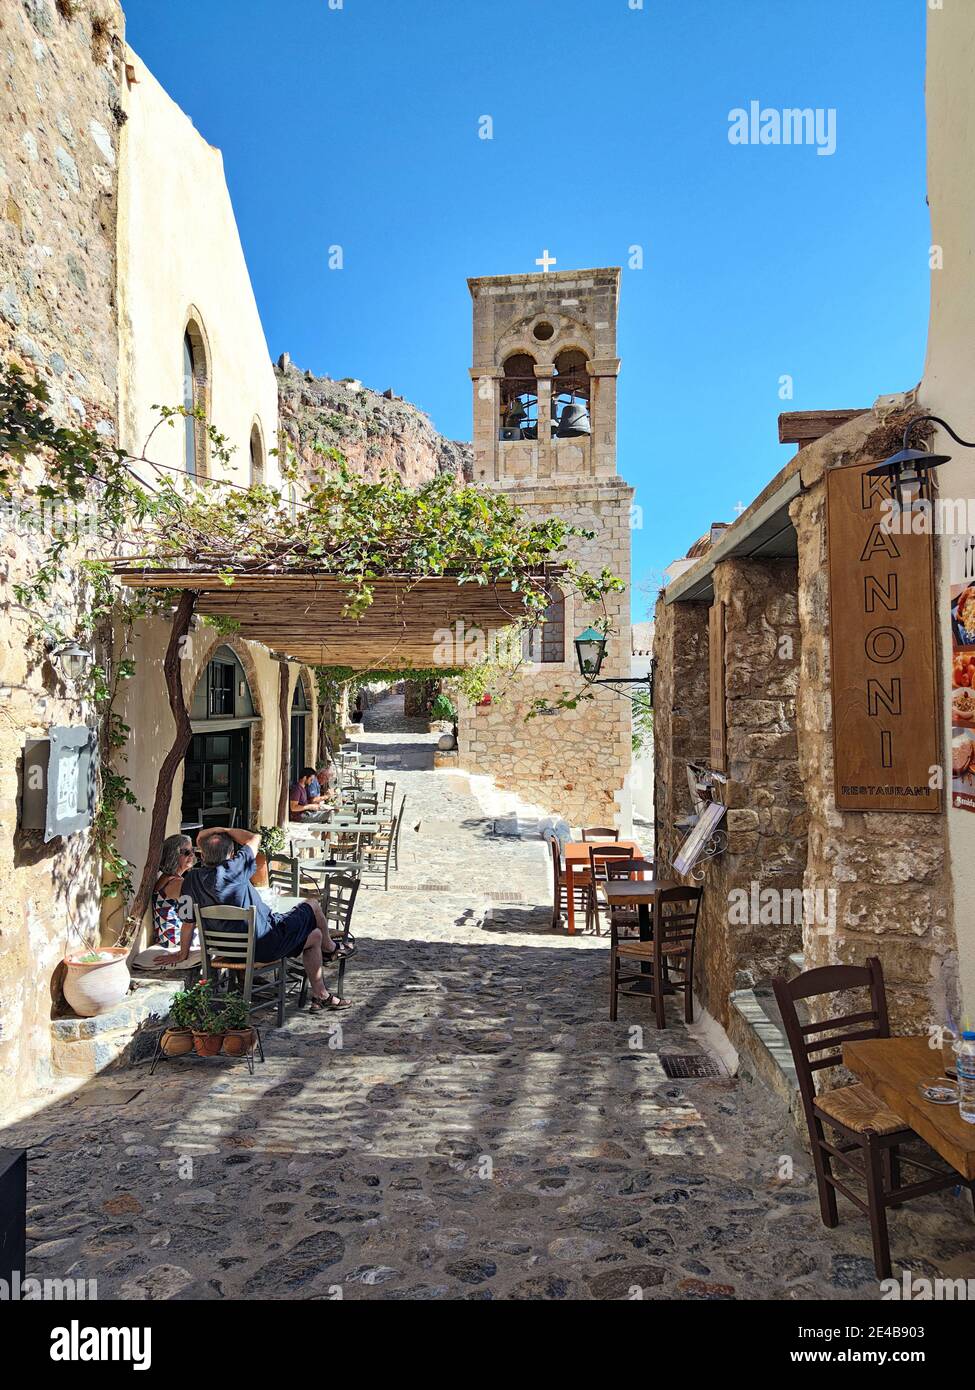 A narrow alley leads to a free-standing bell tower in the lower town of Monemvasia, Corona times, Laconia, Peloponnese, Greece Stock Photo